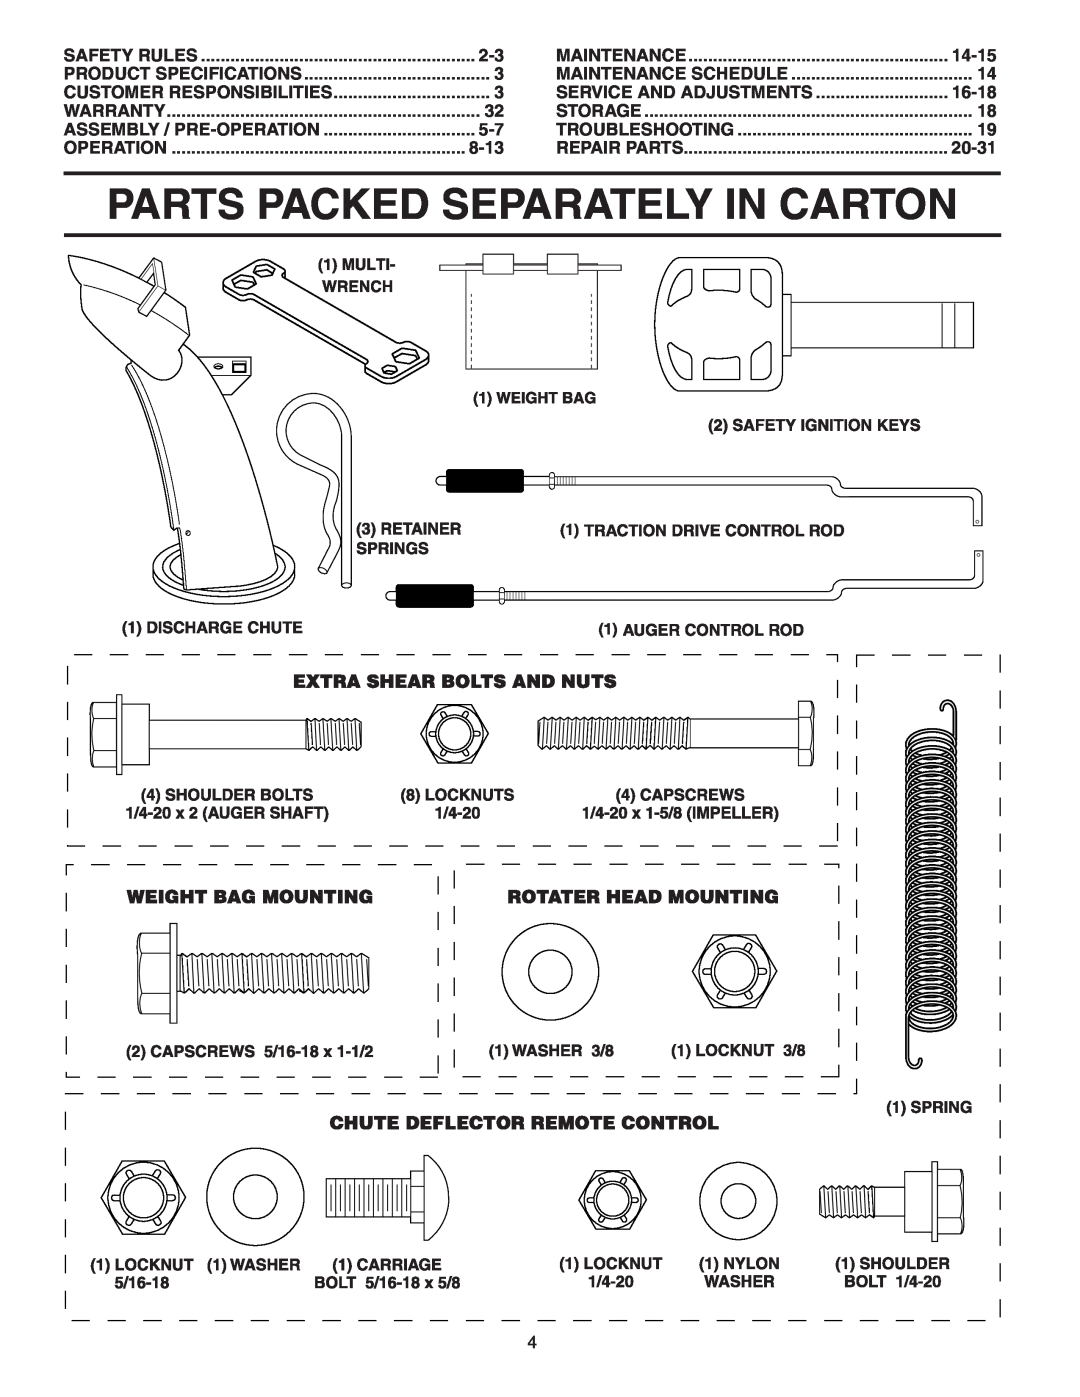 Poulan 185136 Parts Packed Separately In Carton, 8-13, 14-15, Service And Adjustments, 16-18, 20-31, Safety Rules, Storage 